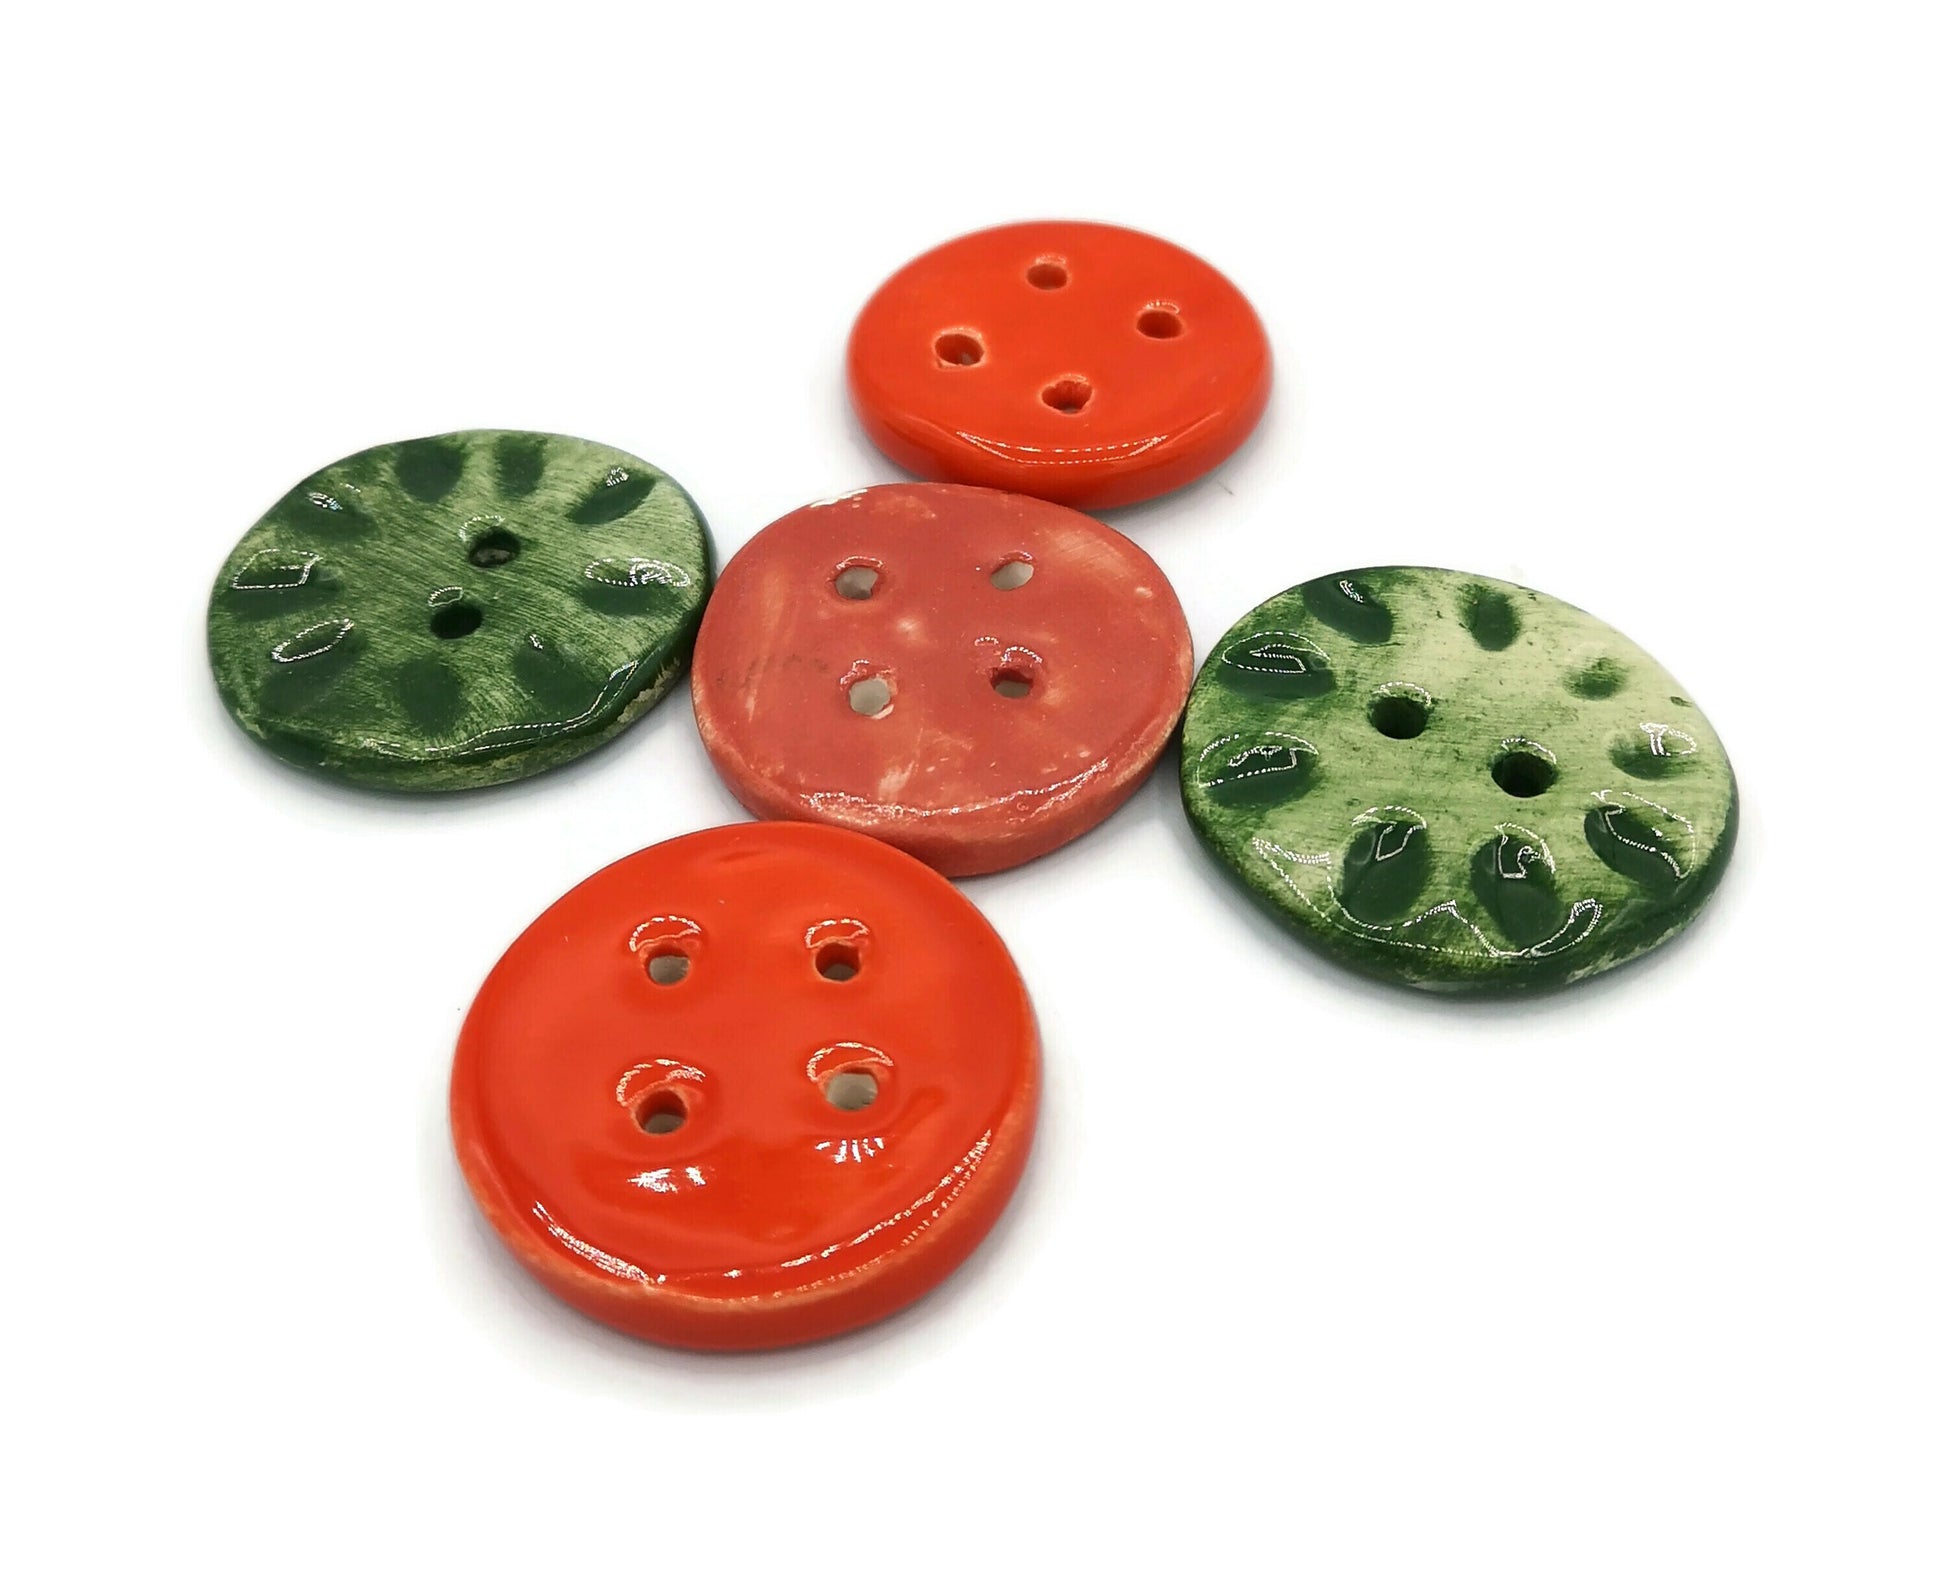 Unique Sewing Buttons, 5 Pcs Elegant Sewing Supplies And Notions, Handmade Ceramic Round Buttons Antique Look, Best Sellers Jewelry Making - Ceramica Ana Rafael